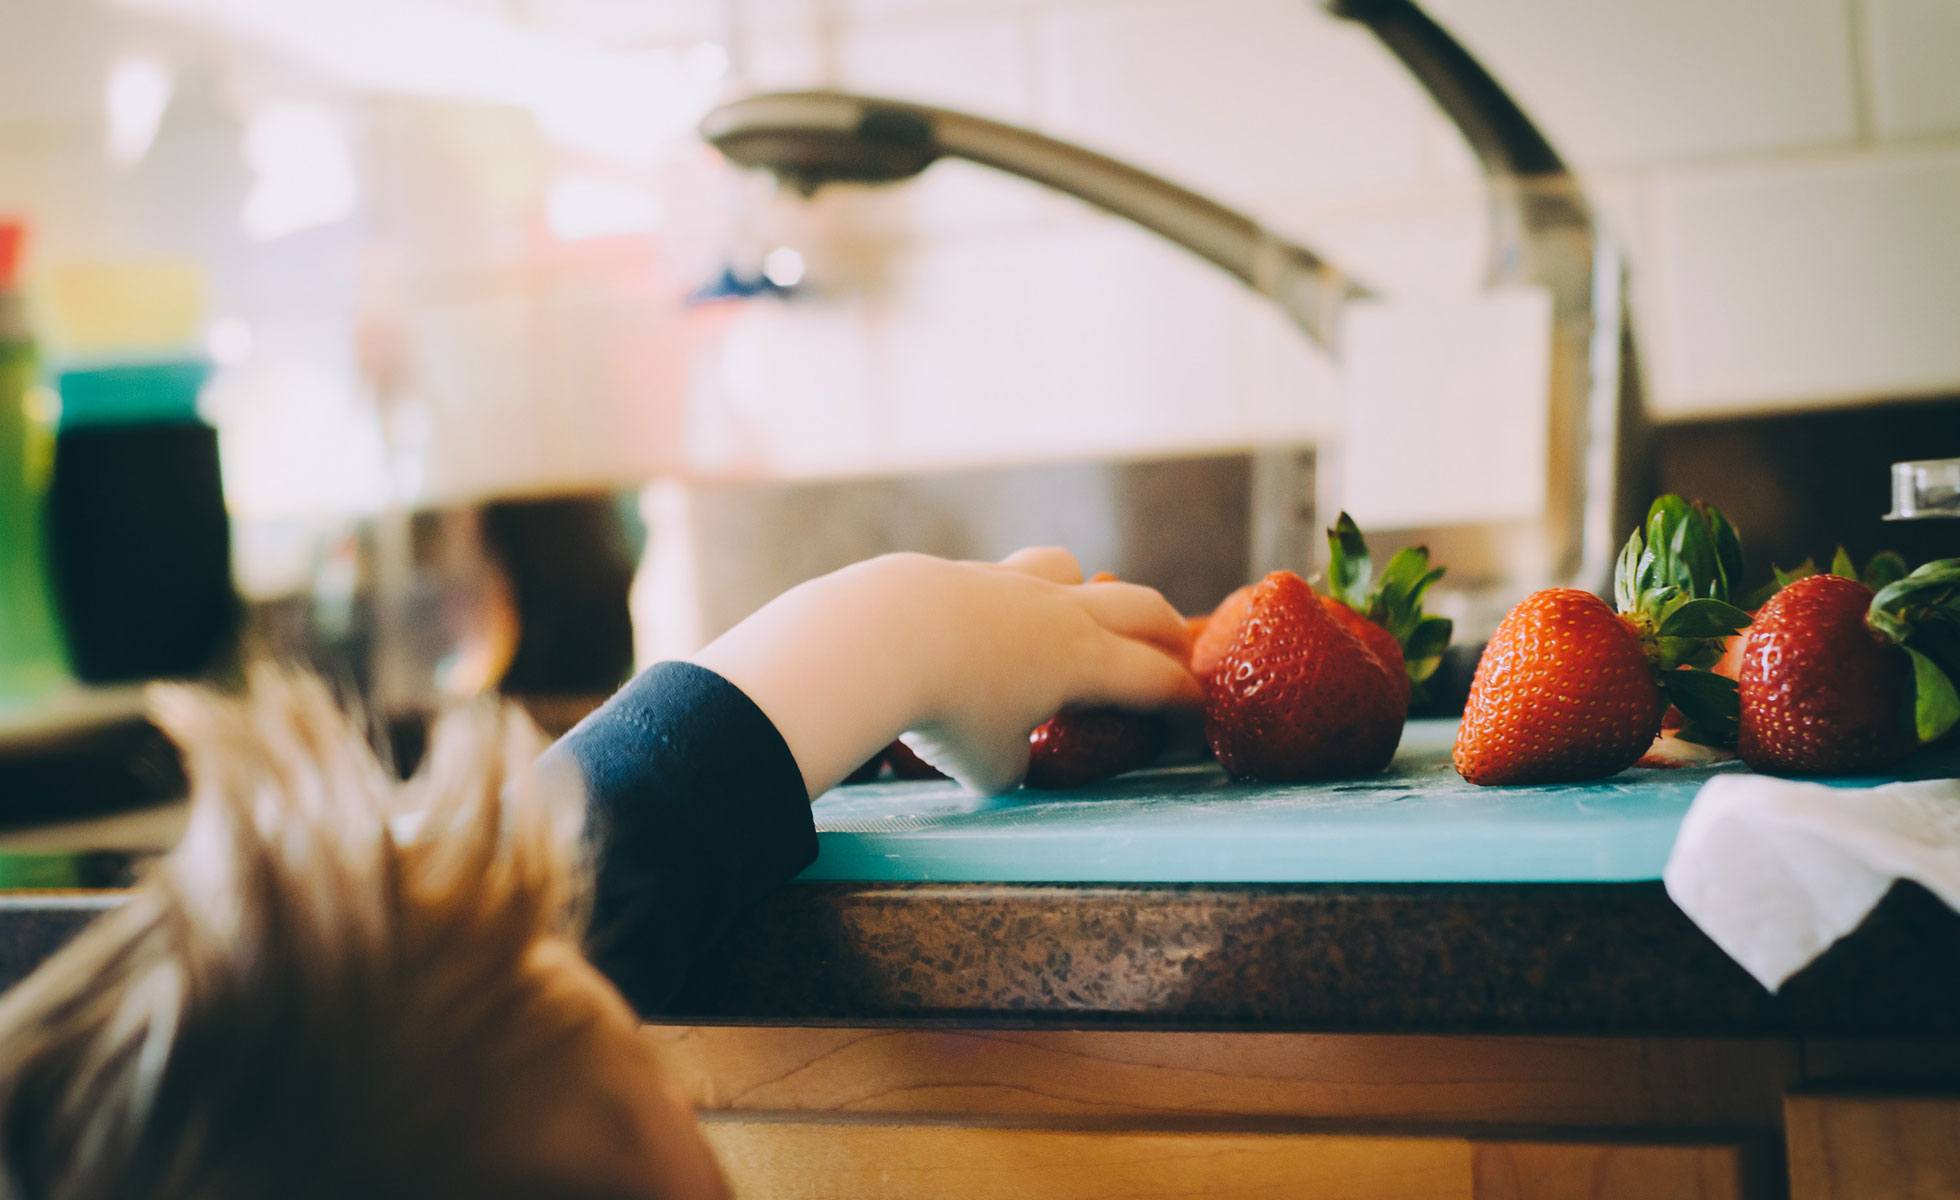 Child reaching for a washed strawberry